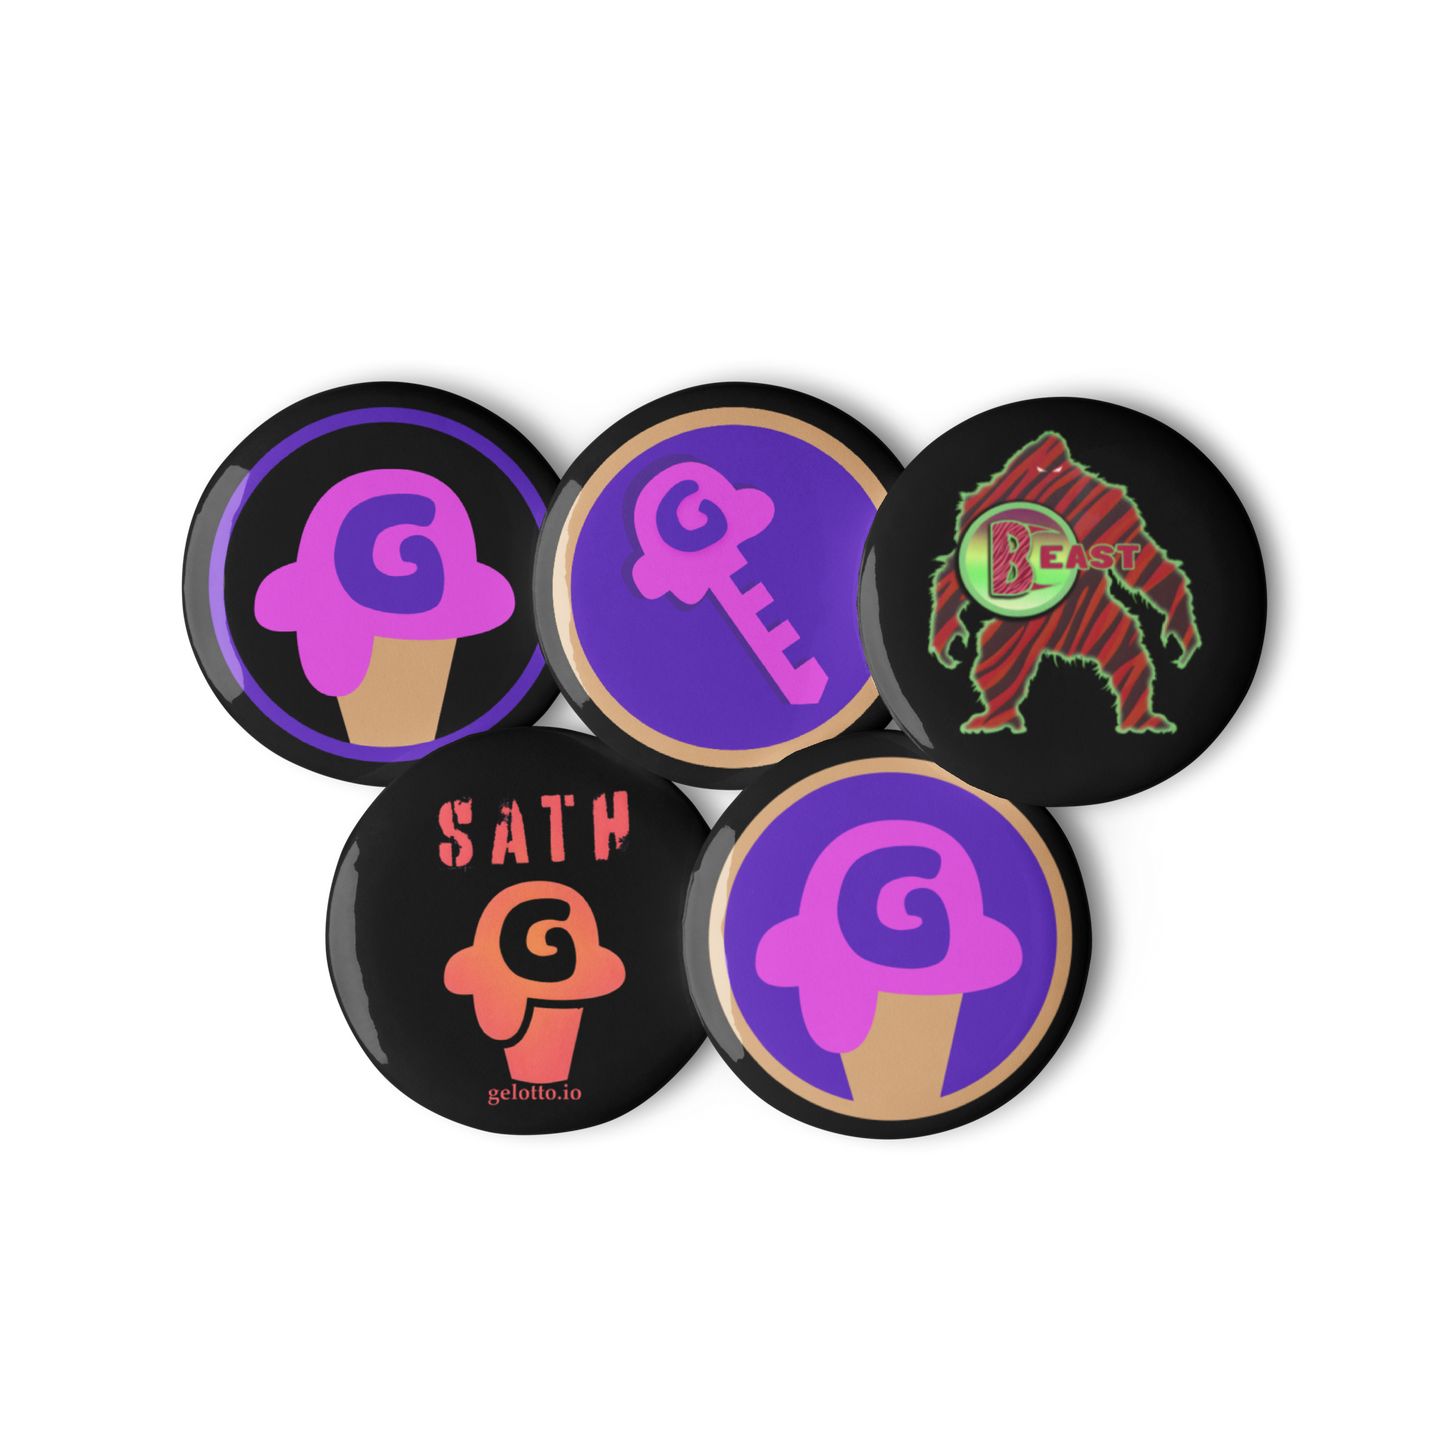 Gelotto, GKEY, BEAST, SATH Set of pin buttons (black)